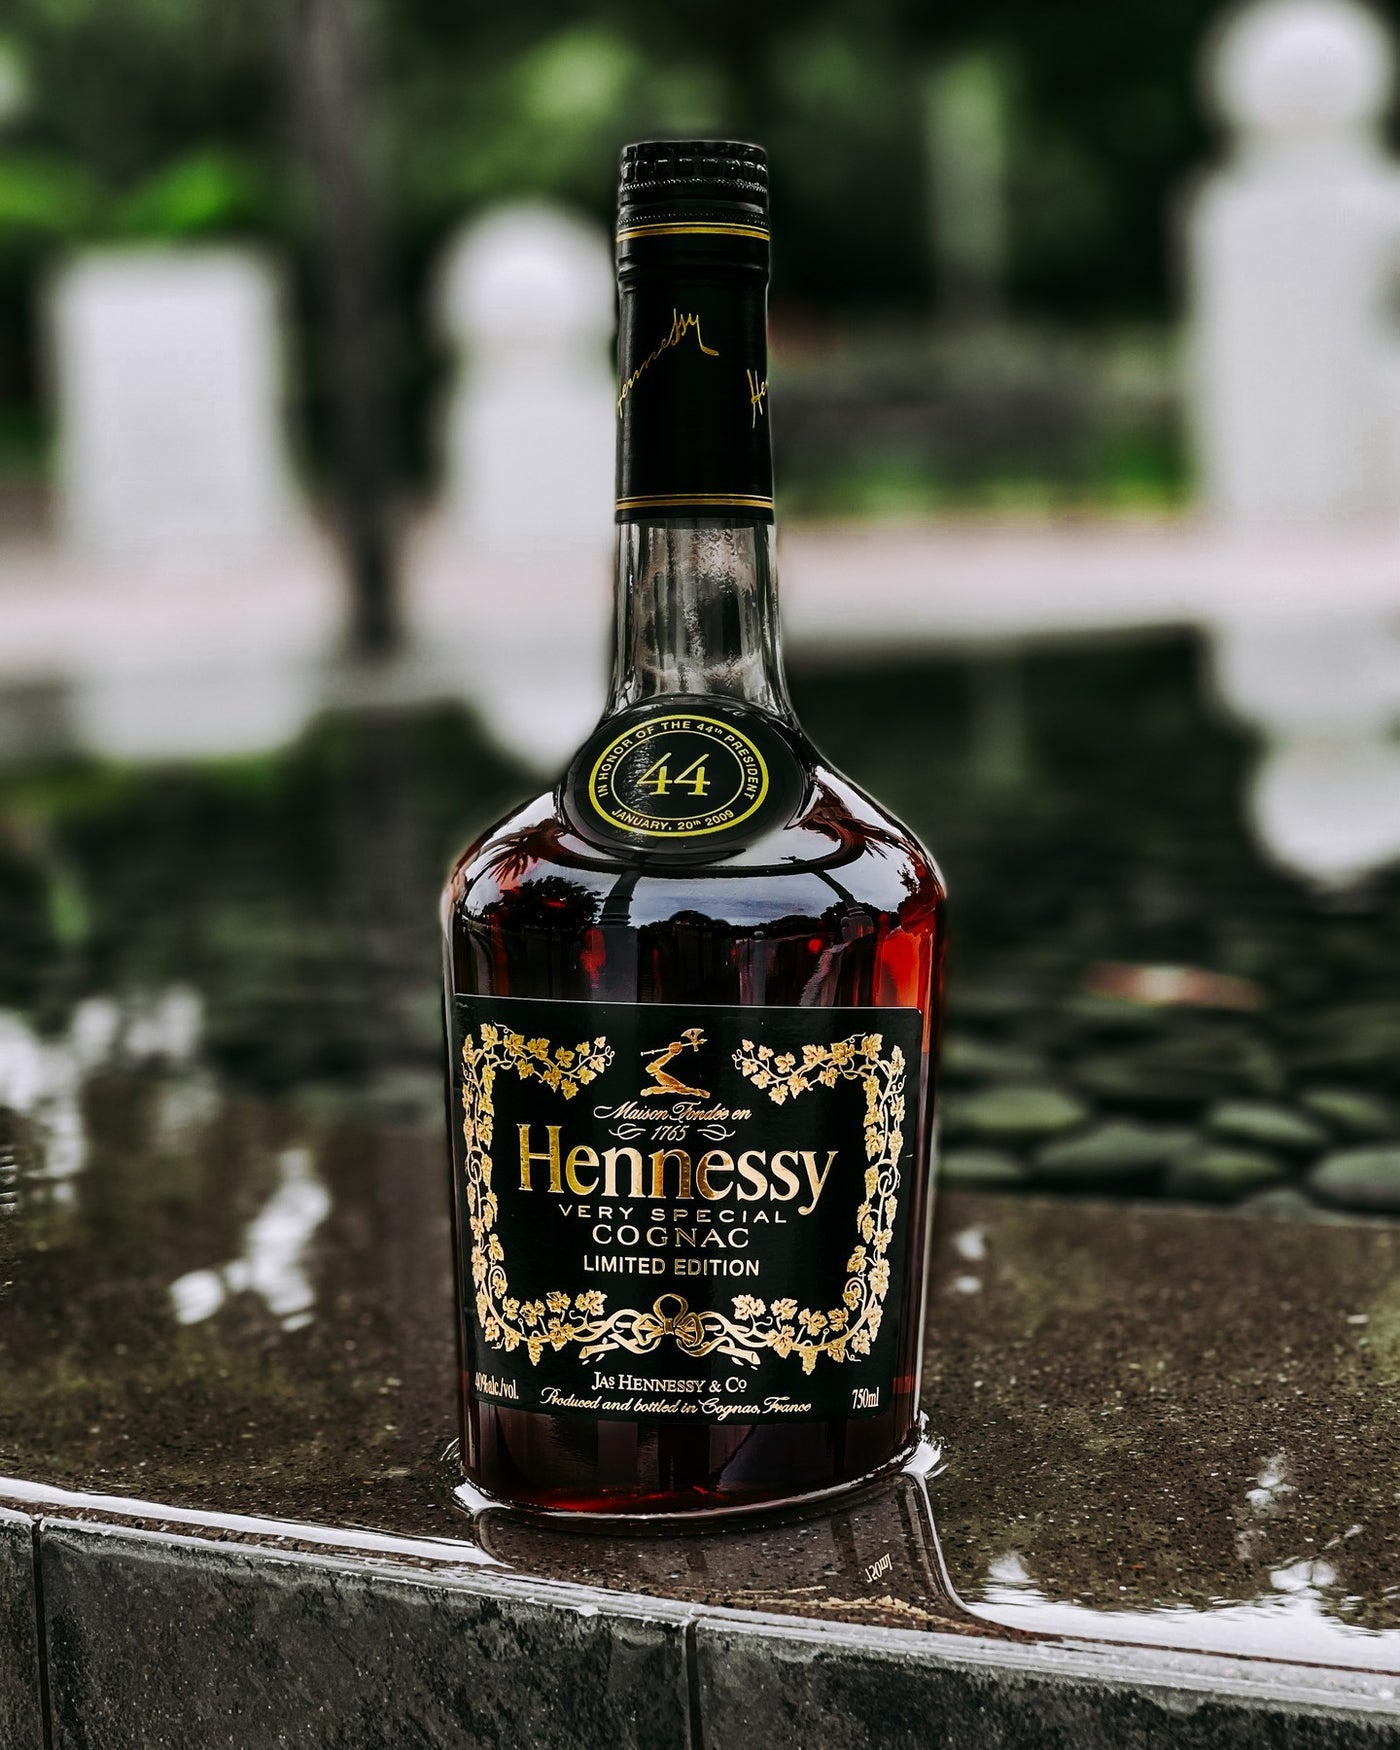 BUY] Hennessy Obama 44th Presidential Collector Edition at CaskCartel.com